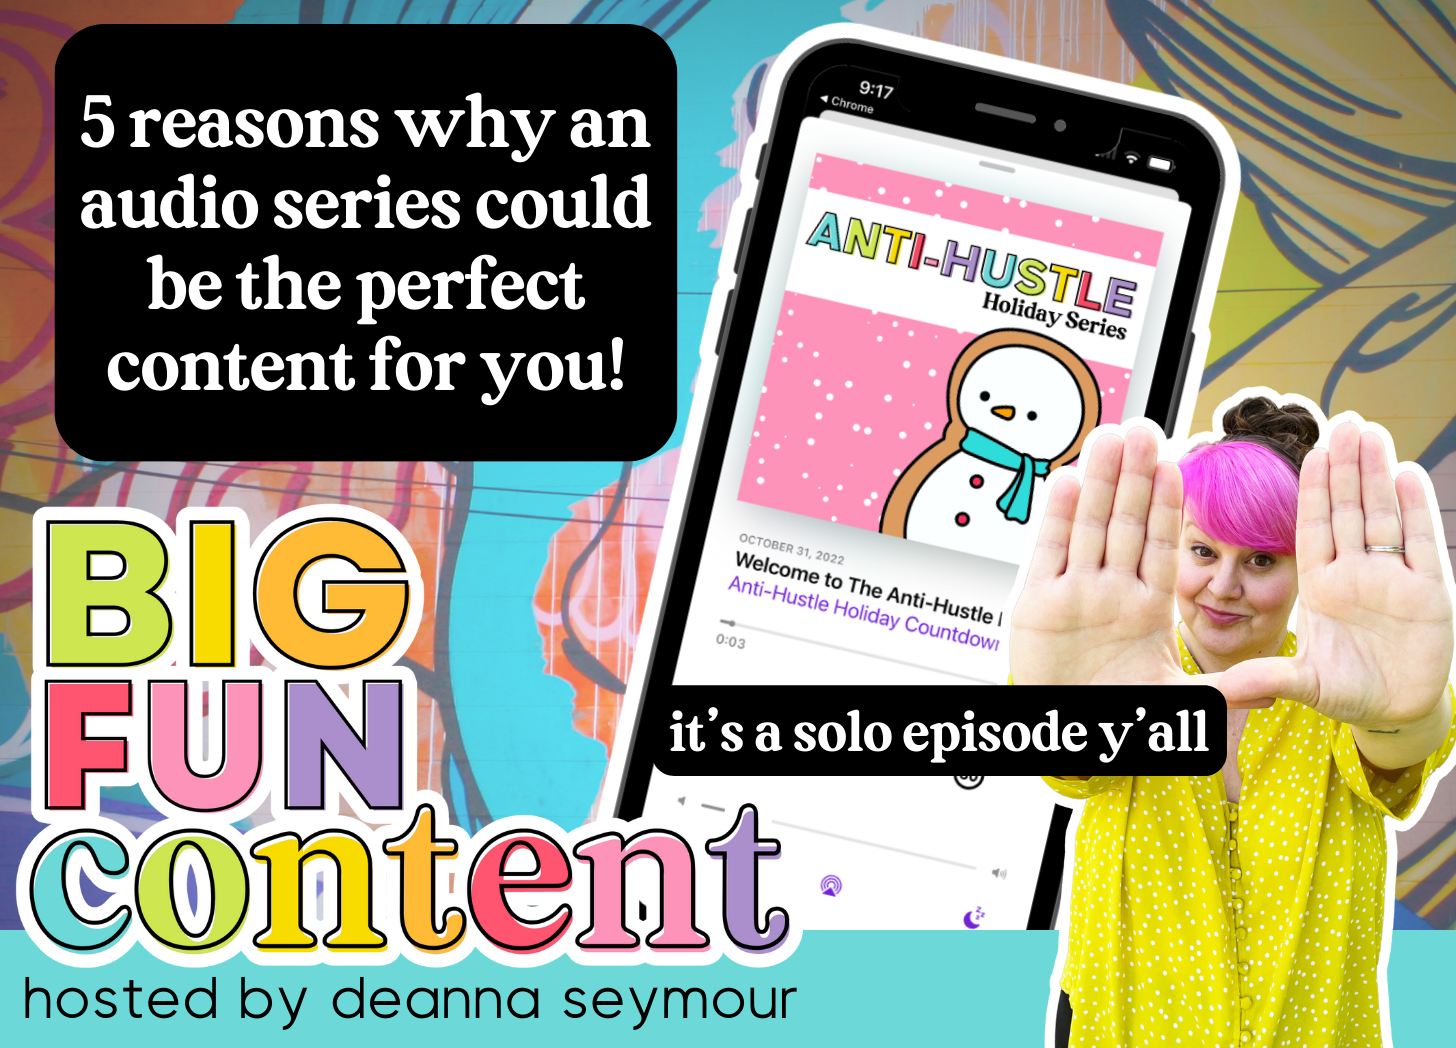 audi series, anti-hustle holiday, phone over bright colors, snowman with bright colors, deanna seymour, big fun content podcast